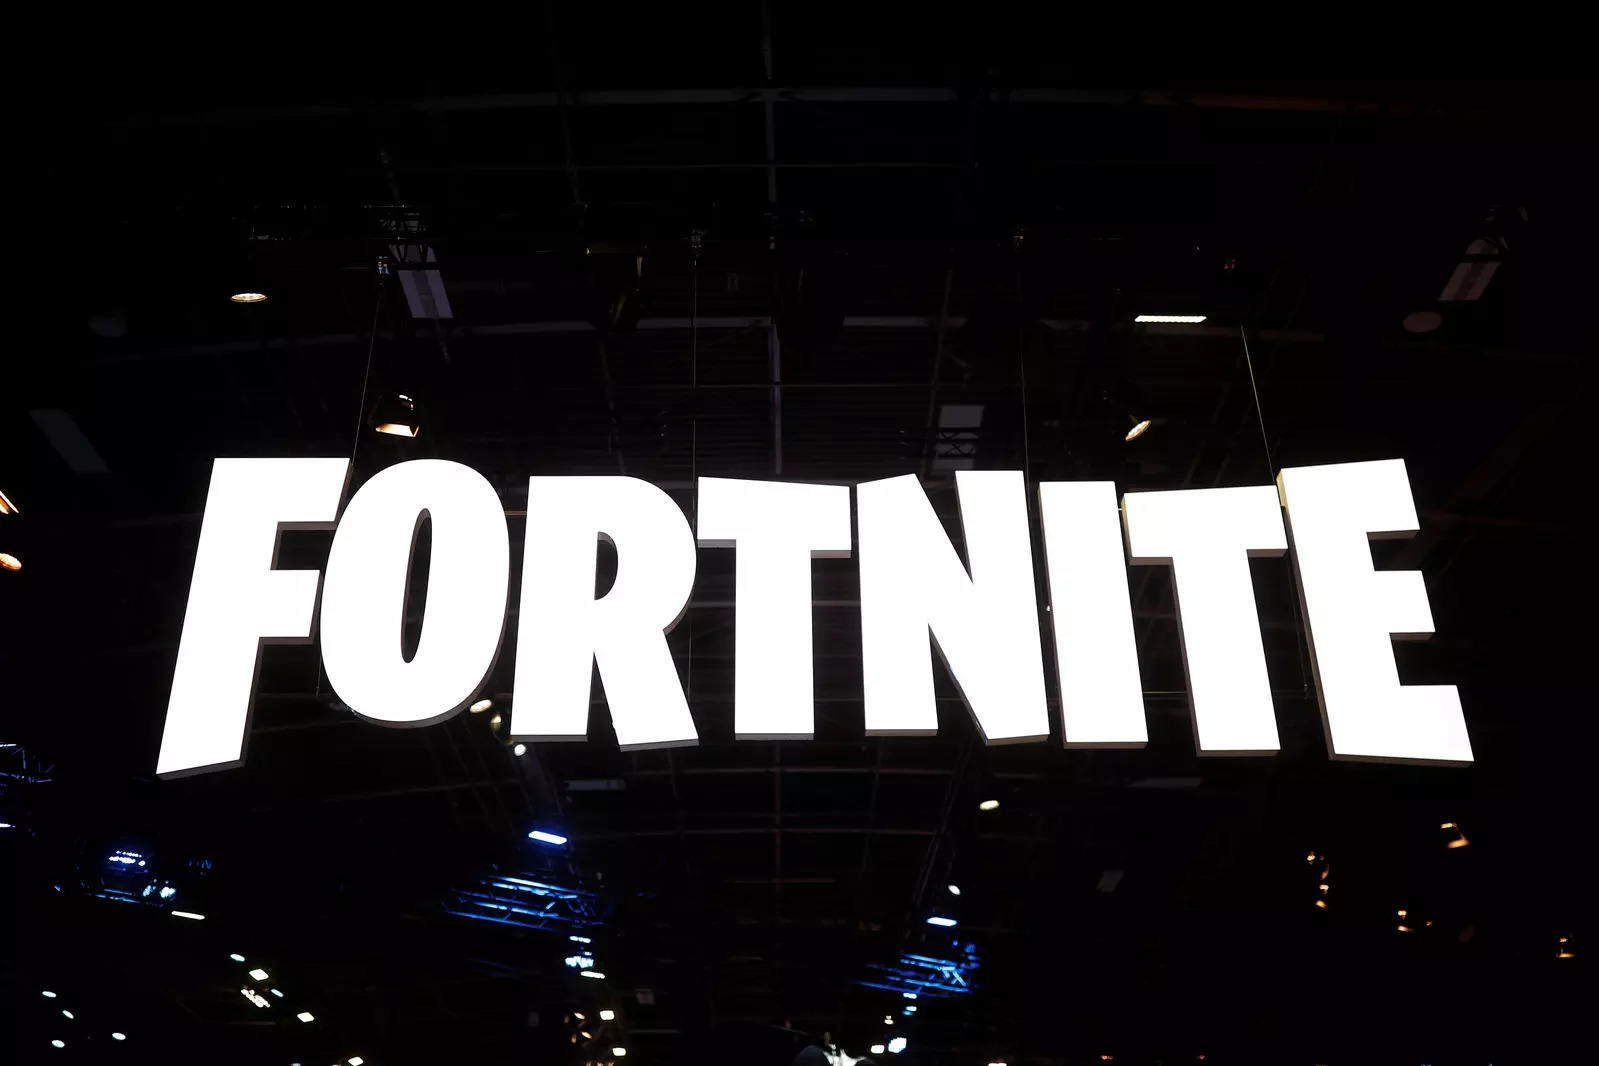 Microsoft enters into Epic partnership that will bring Fortnite as first  F2P game in Xbox Cloud Gaming - The Tech Portal